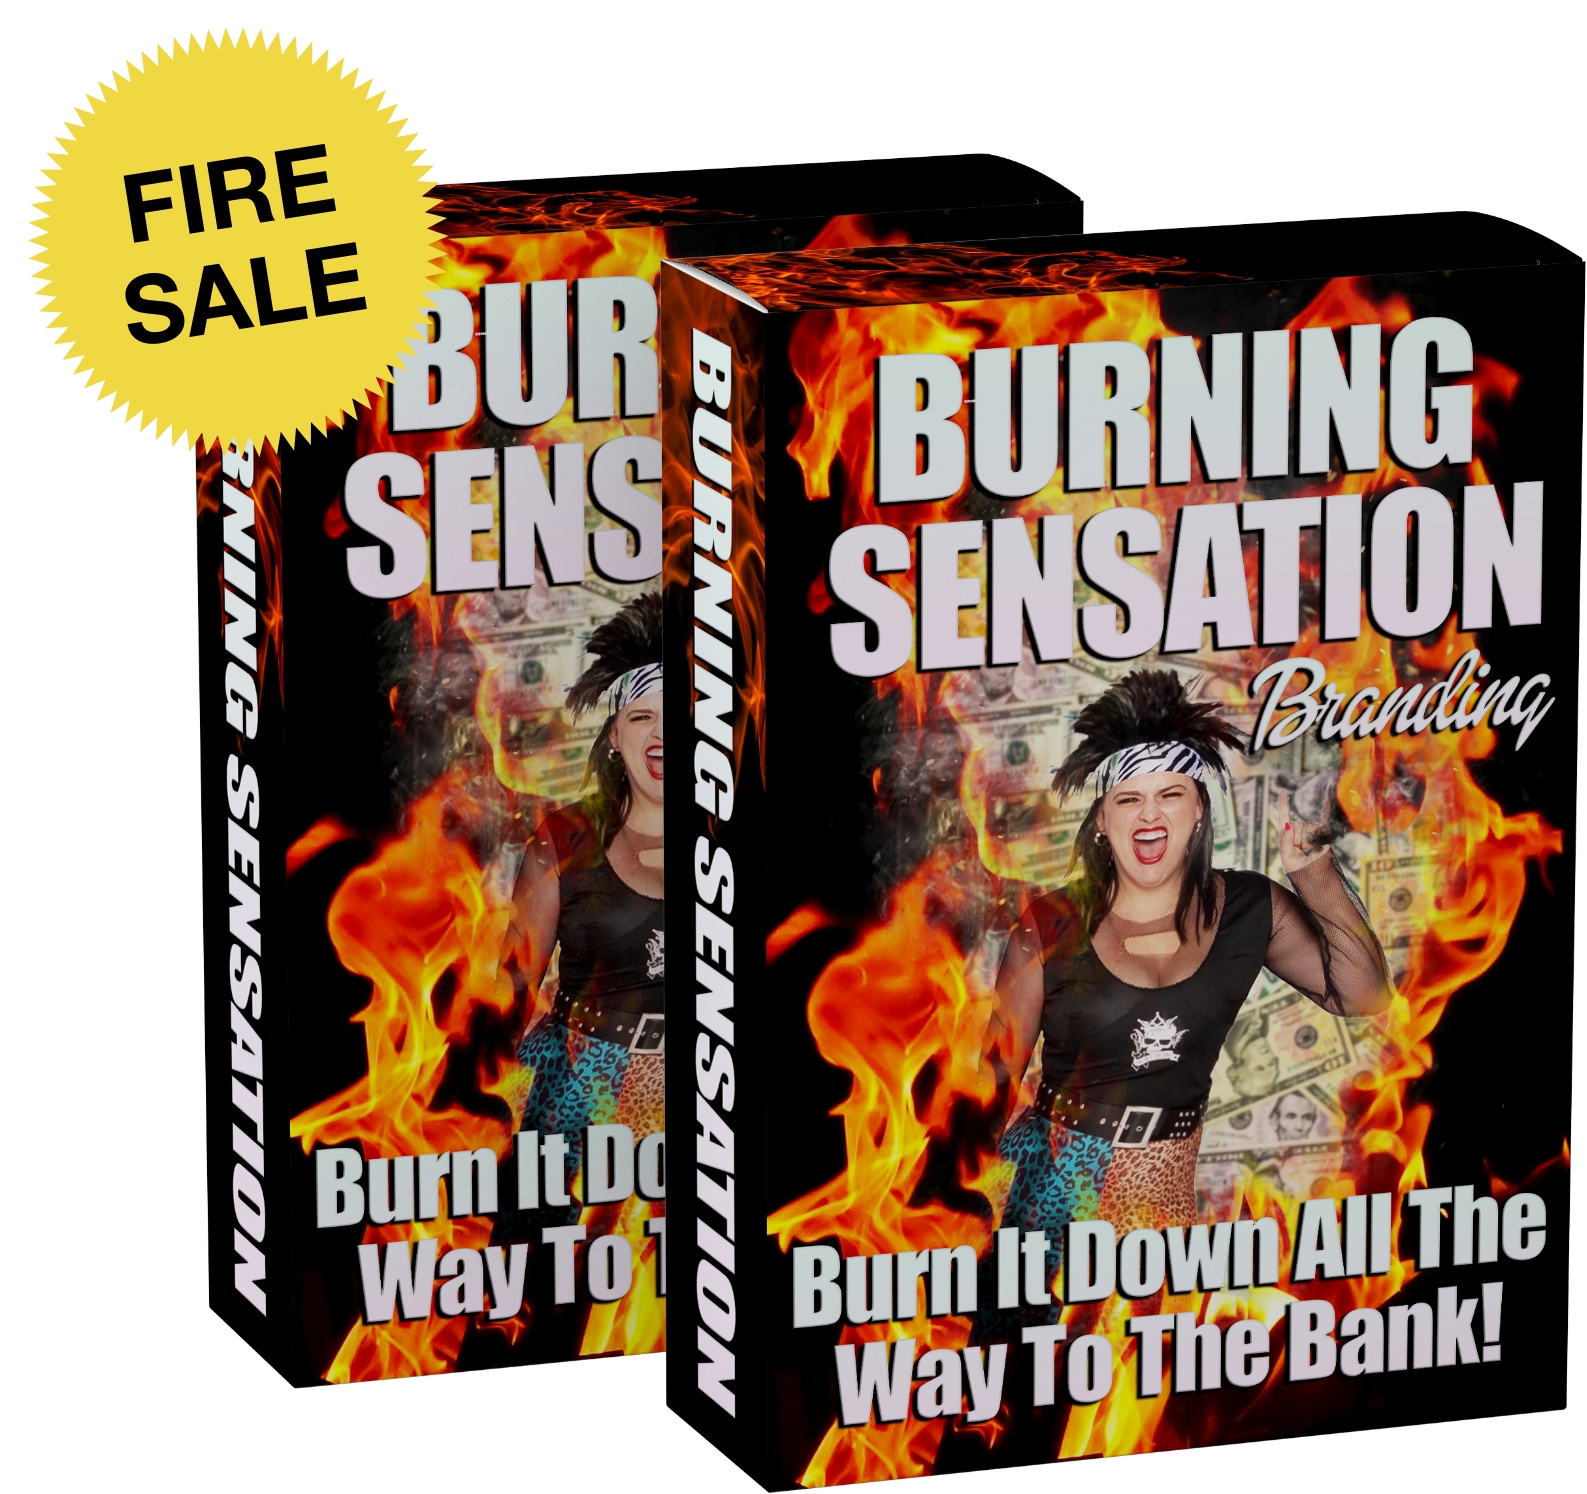 Burning Sensation Branding - Burn It Down All The Way To The Bank!